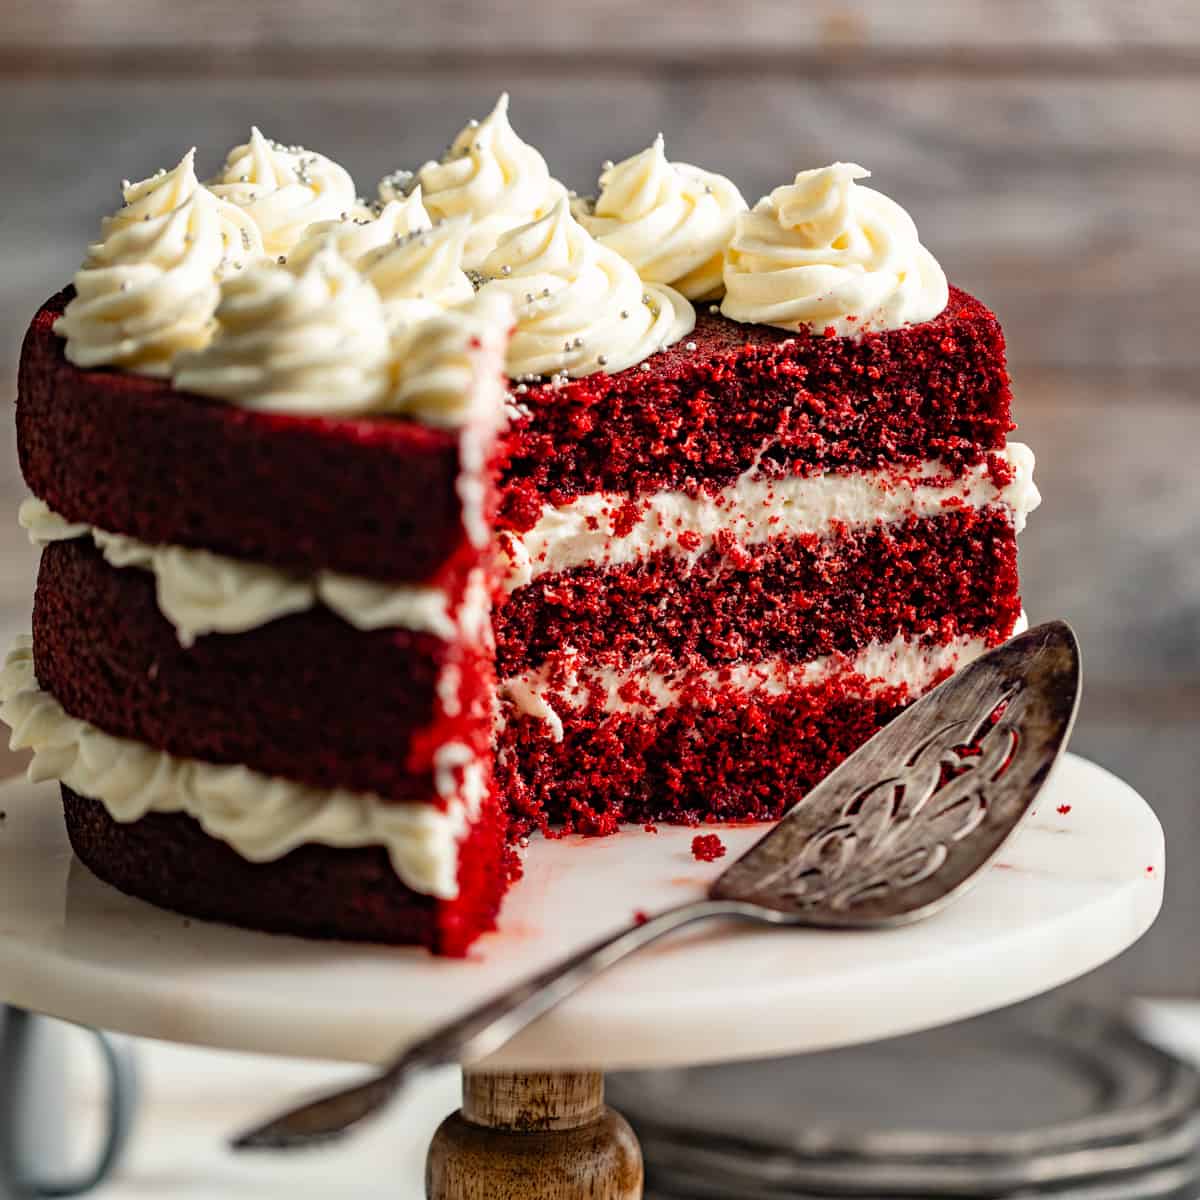 red velvet cake on a cake stand with a piece cut out showing the inner cake layers.